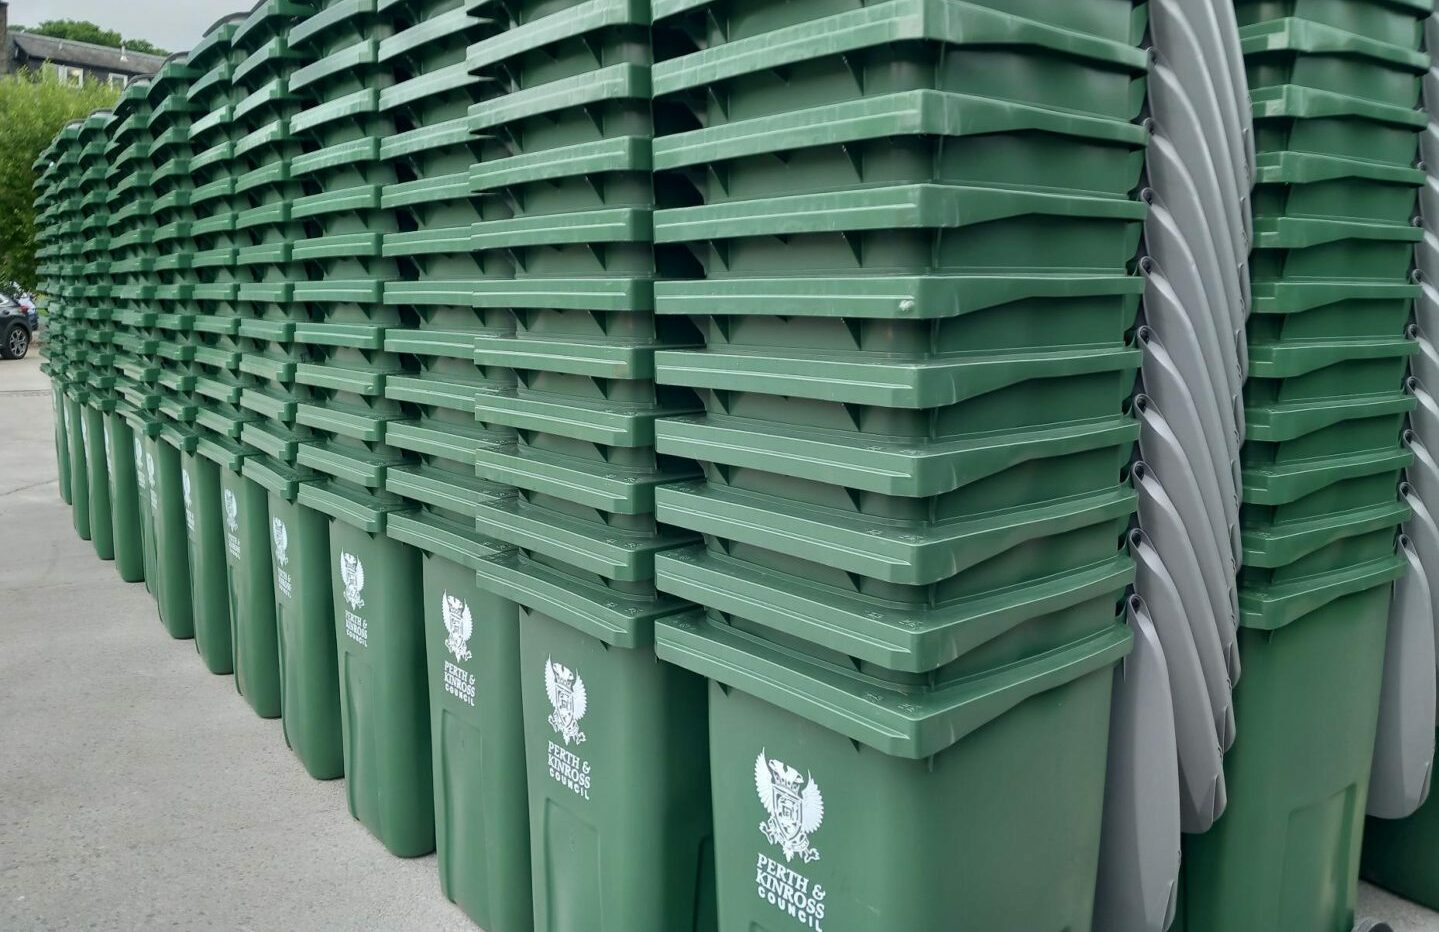 Perth and Kinross Council grey bin Your questions answered